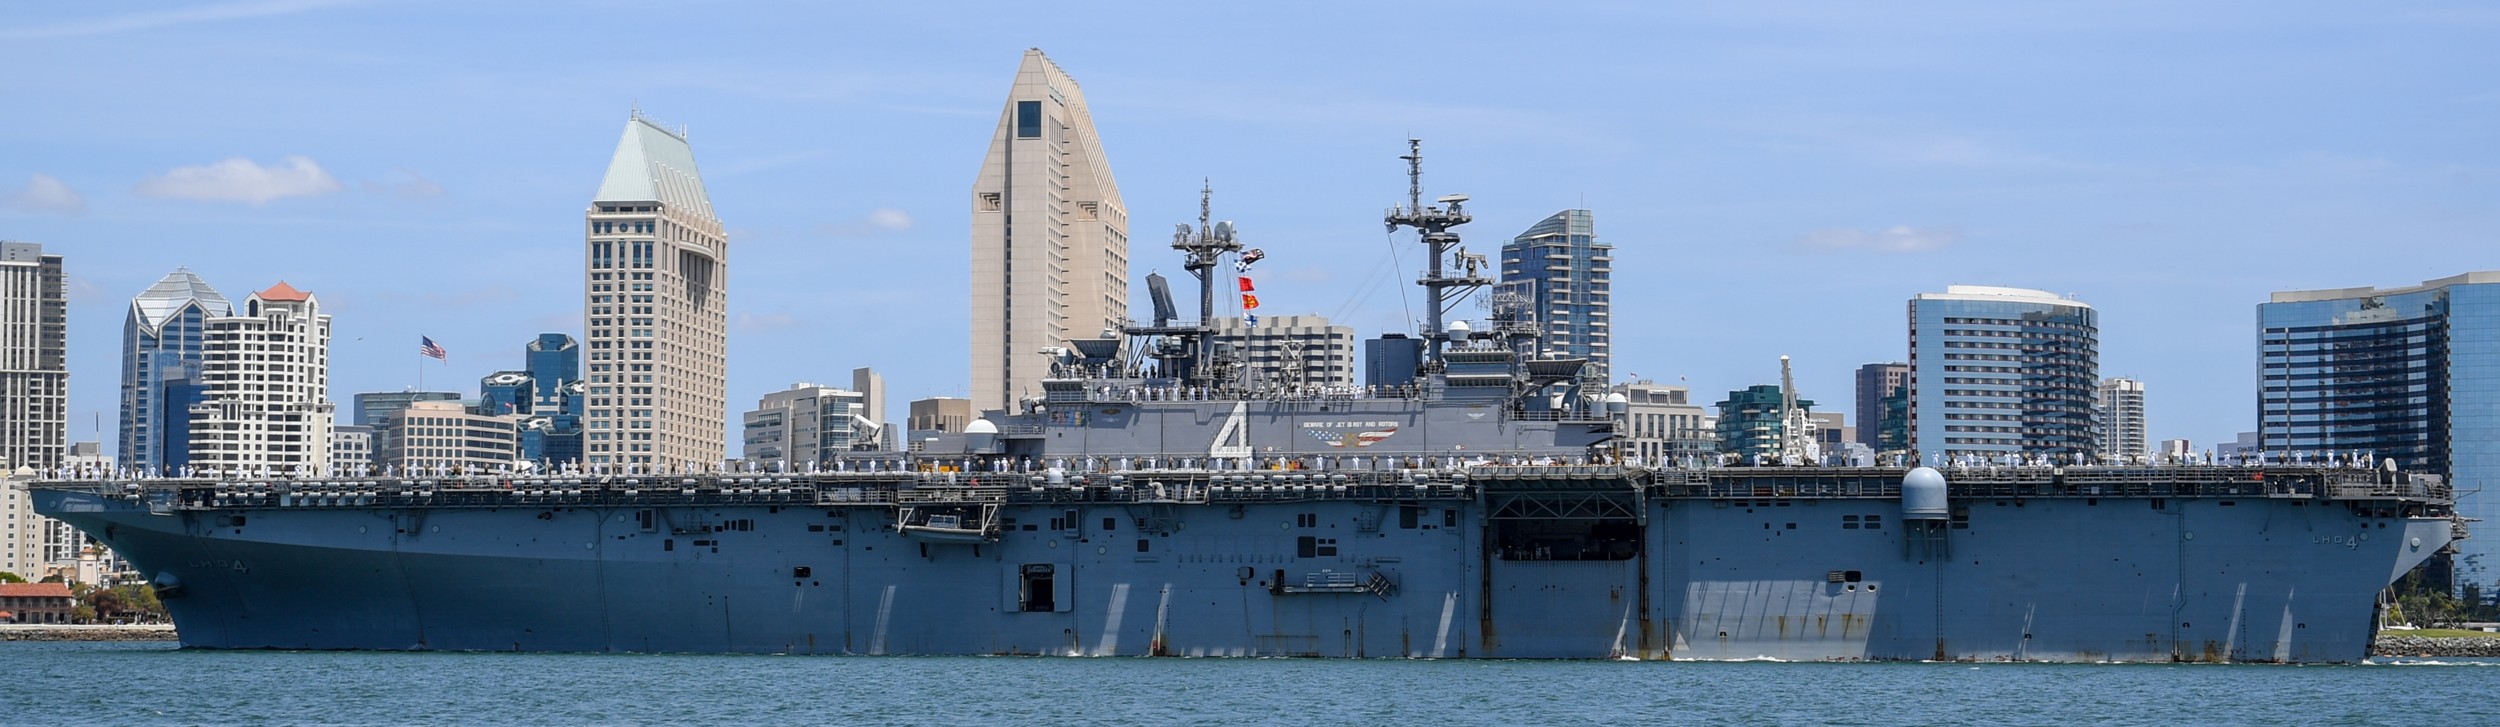 lhd-4 uss boxer wasp class amphibious assault ship landing helicopter dock us navy departing san diego 137